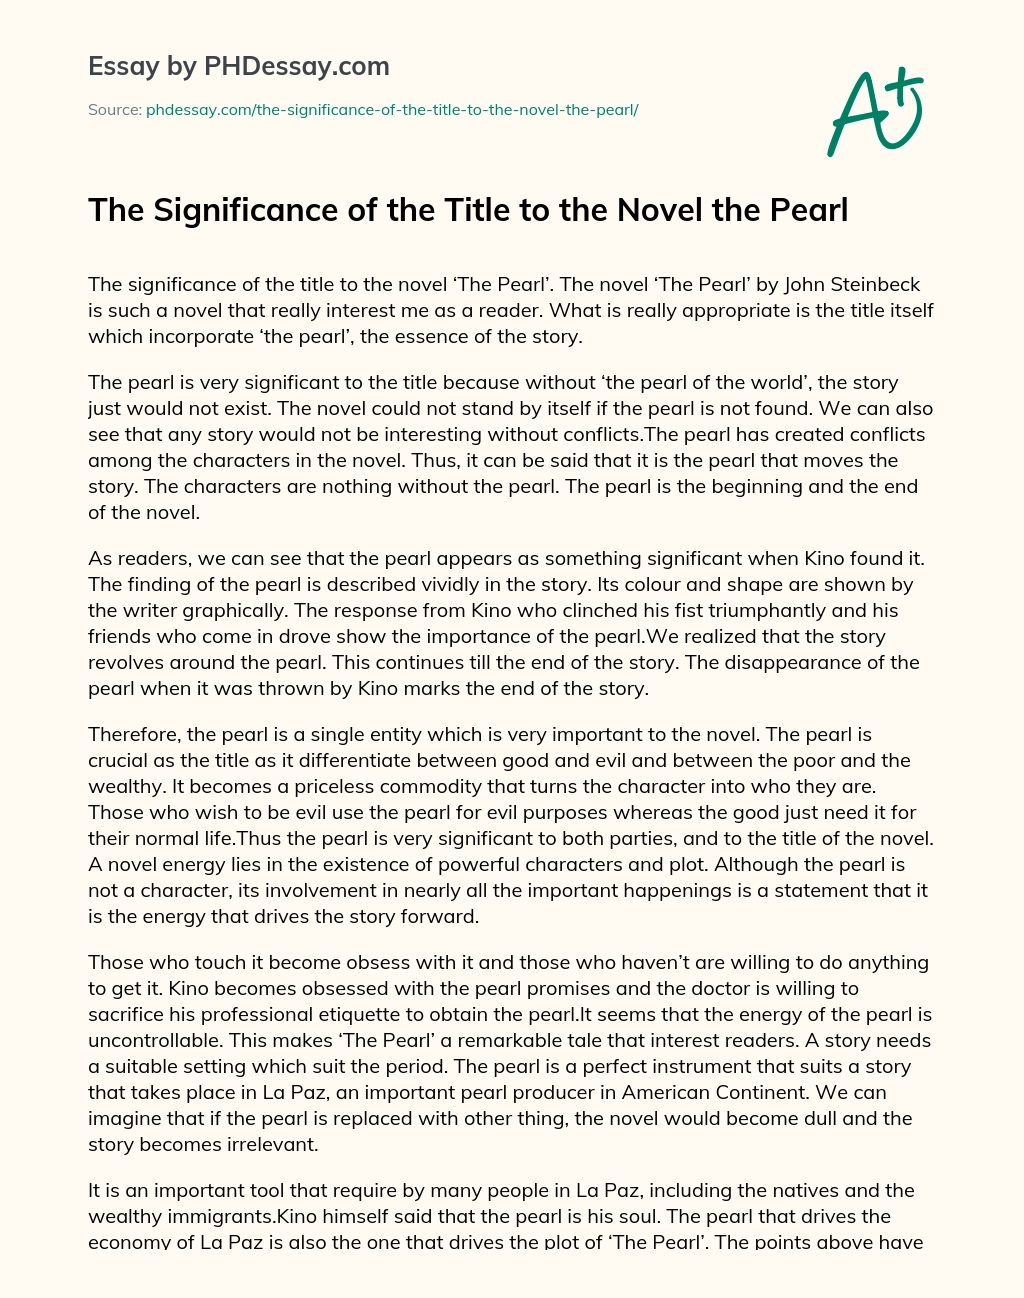 The Significance of the Title to the Novel the Pearl essay